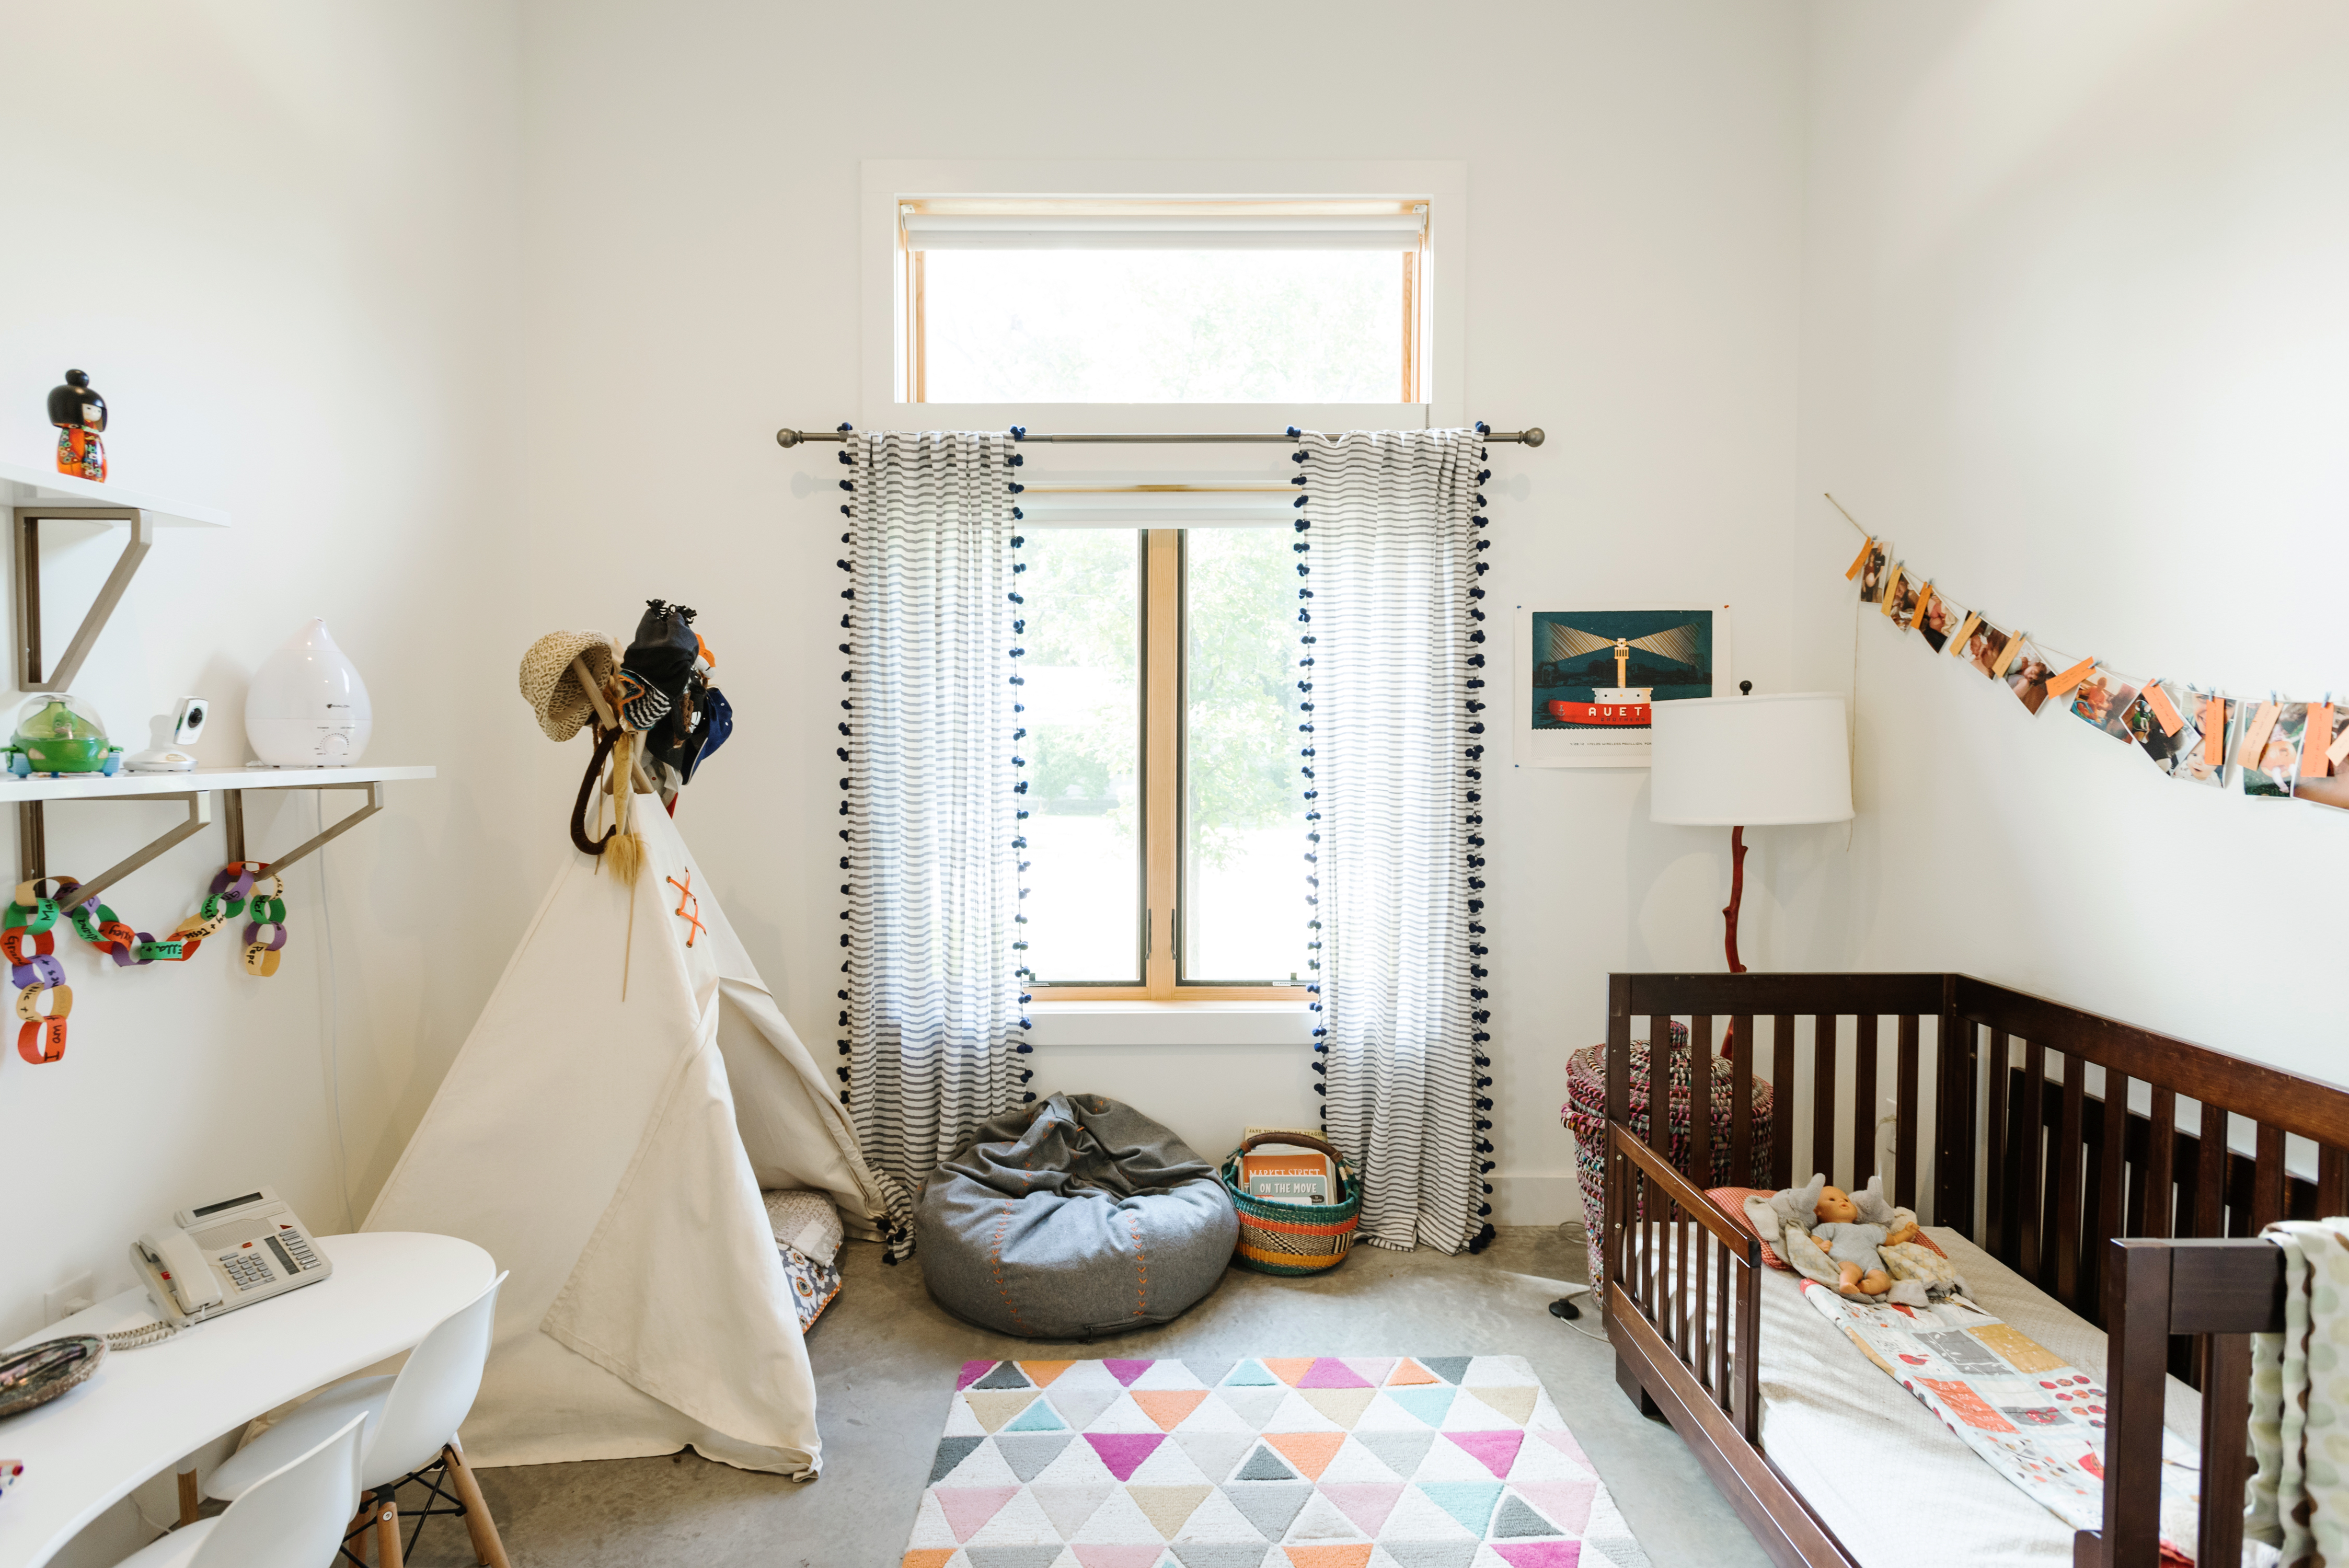 A family friendly home in Austin showing a room with a cot, toys and a teepee for young children